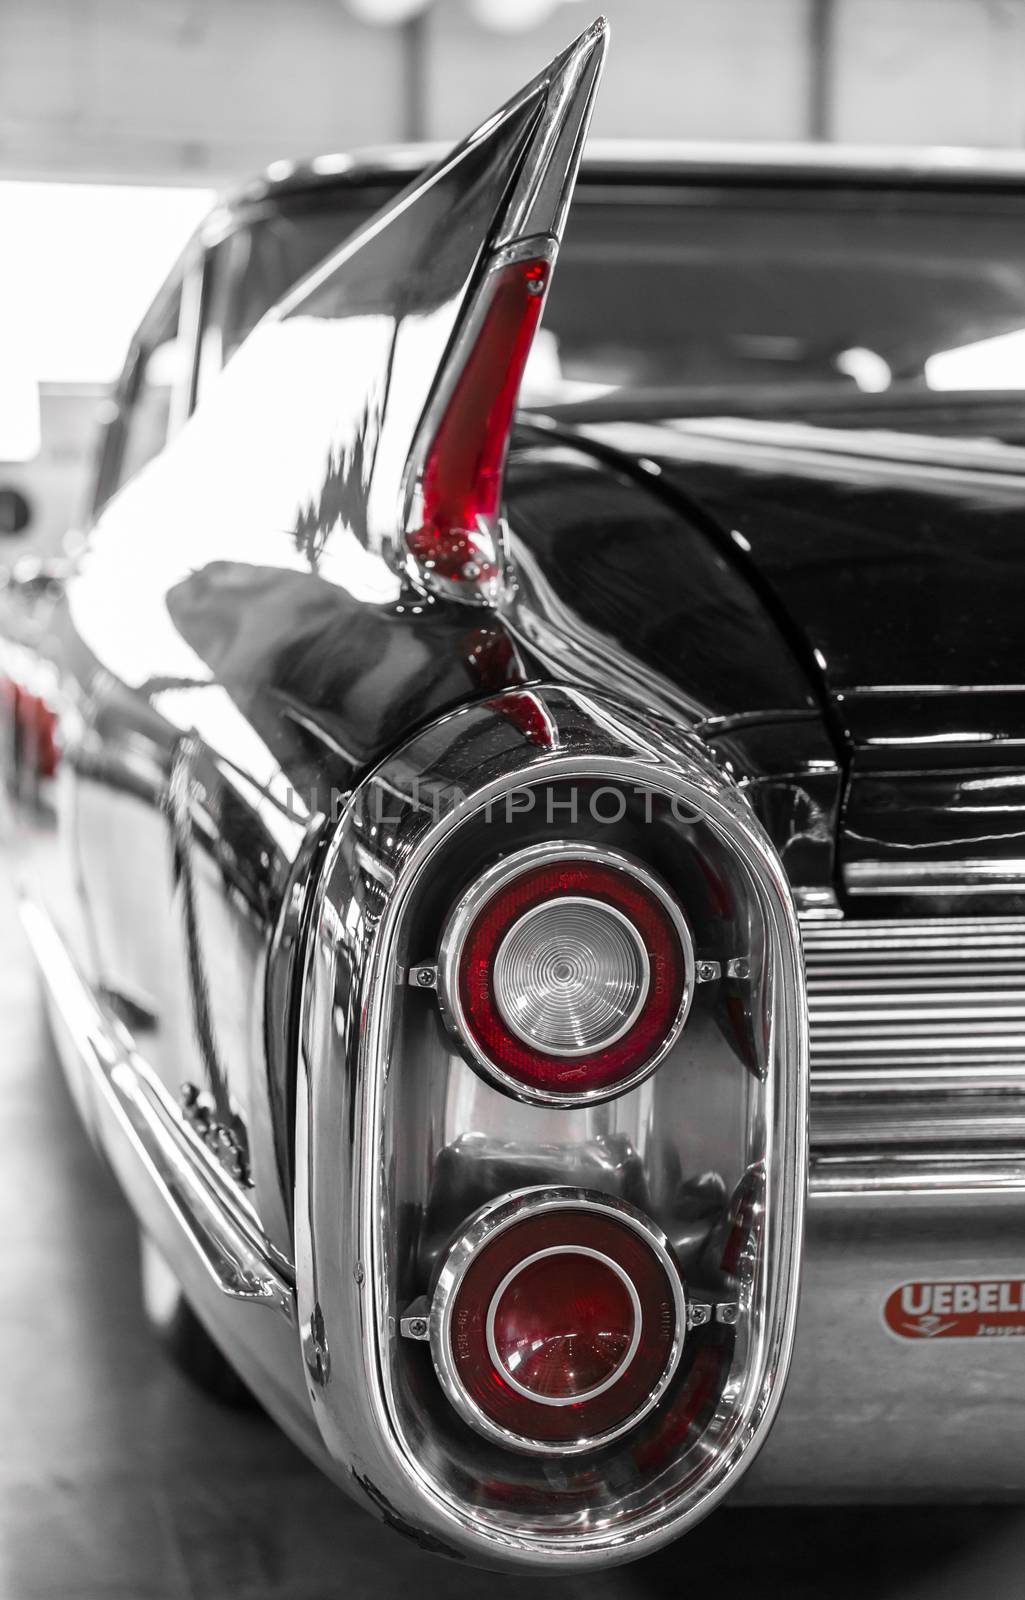 VERONA, ITALY - MAY 9: "Verona Legend Cars" is an important exhibition of cars in Verona on Saturday, May 9, 2015. Fans have the chance to see and buy the most beautiful cars in the world.